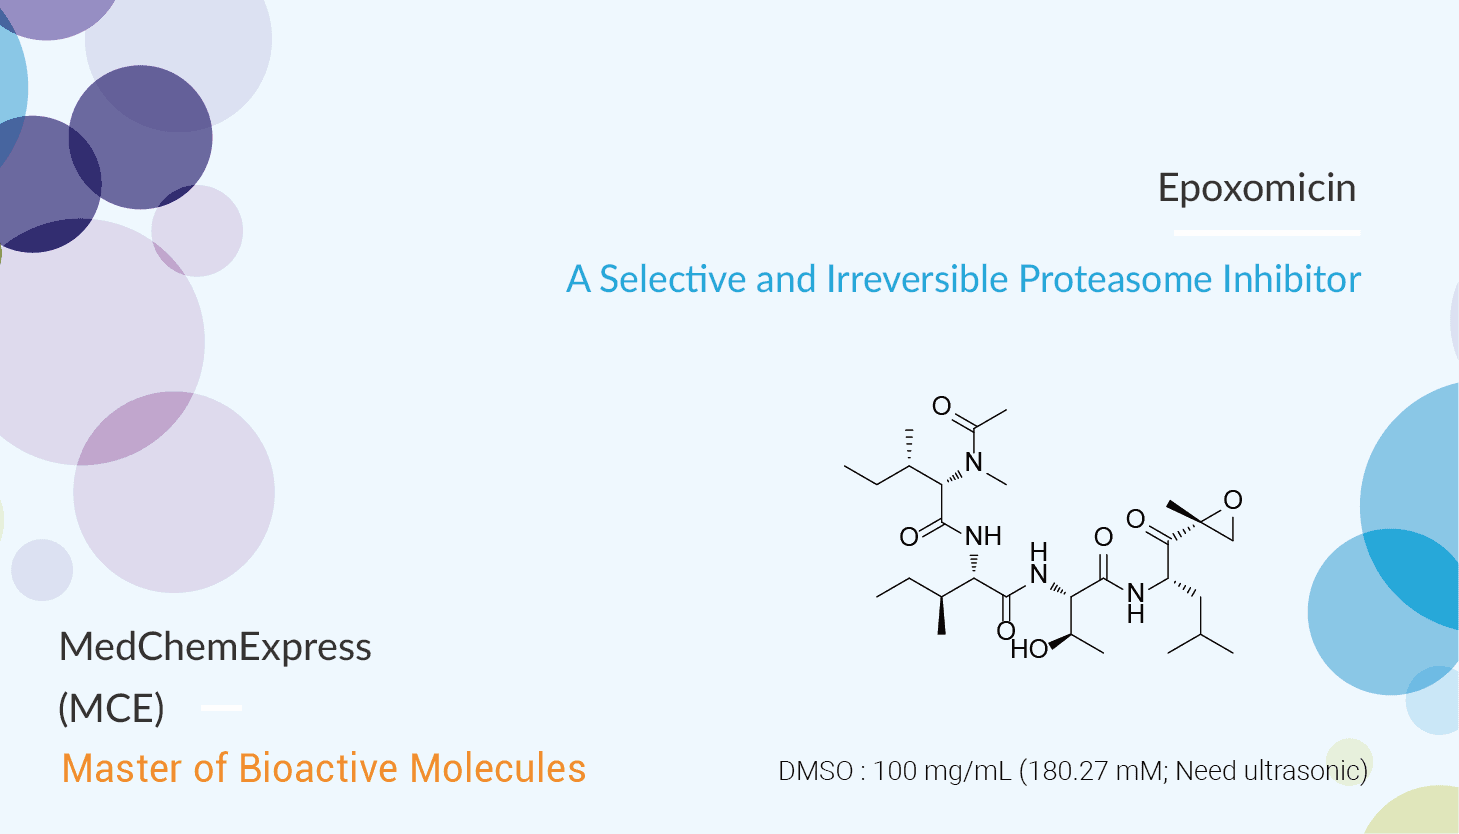 Epoxomicin is a Selective and Irreversible Inhibitor of Proteasome